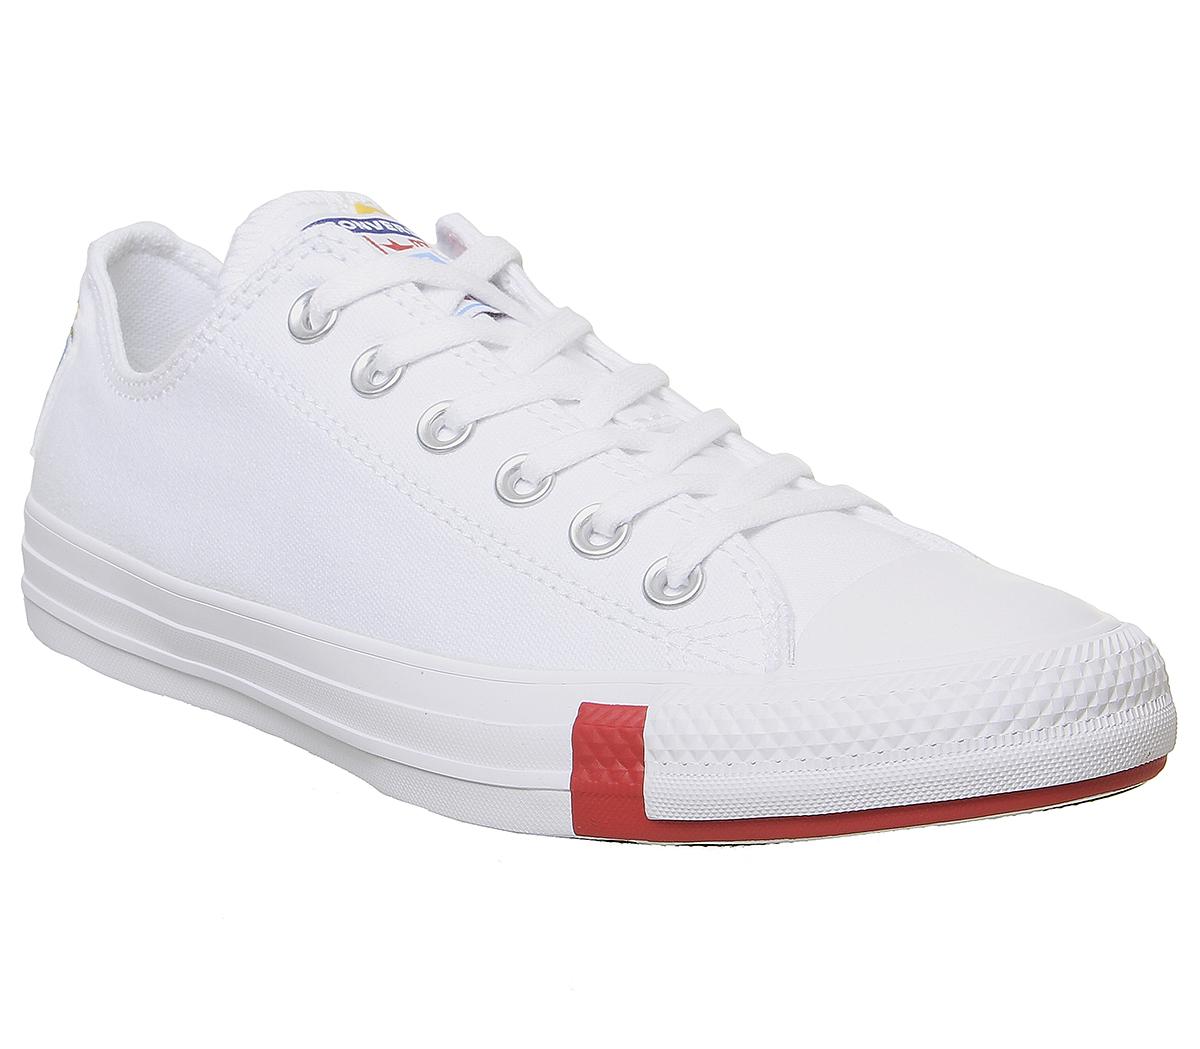 ConverseConverse All Star Low TrainersWhite University Red Black Logo Stacked